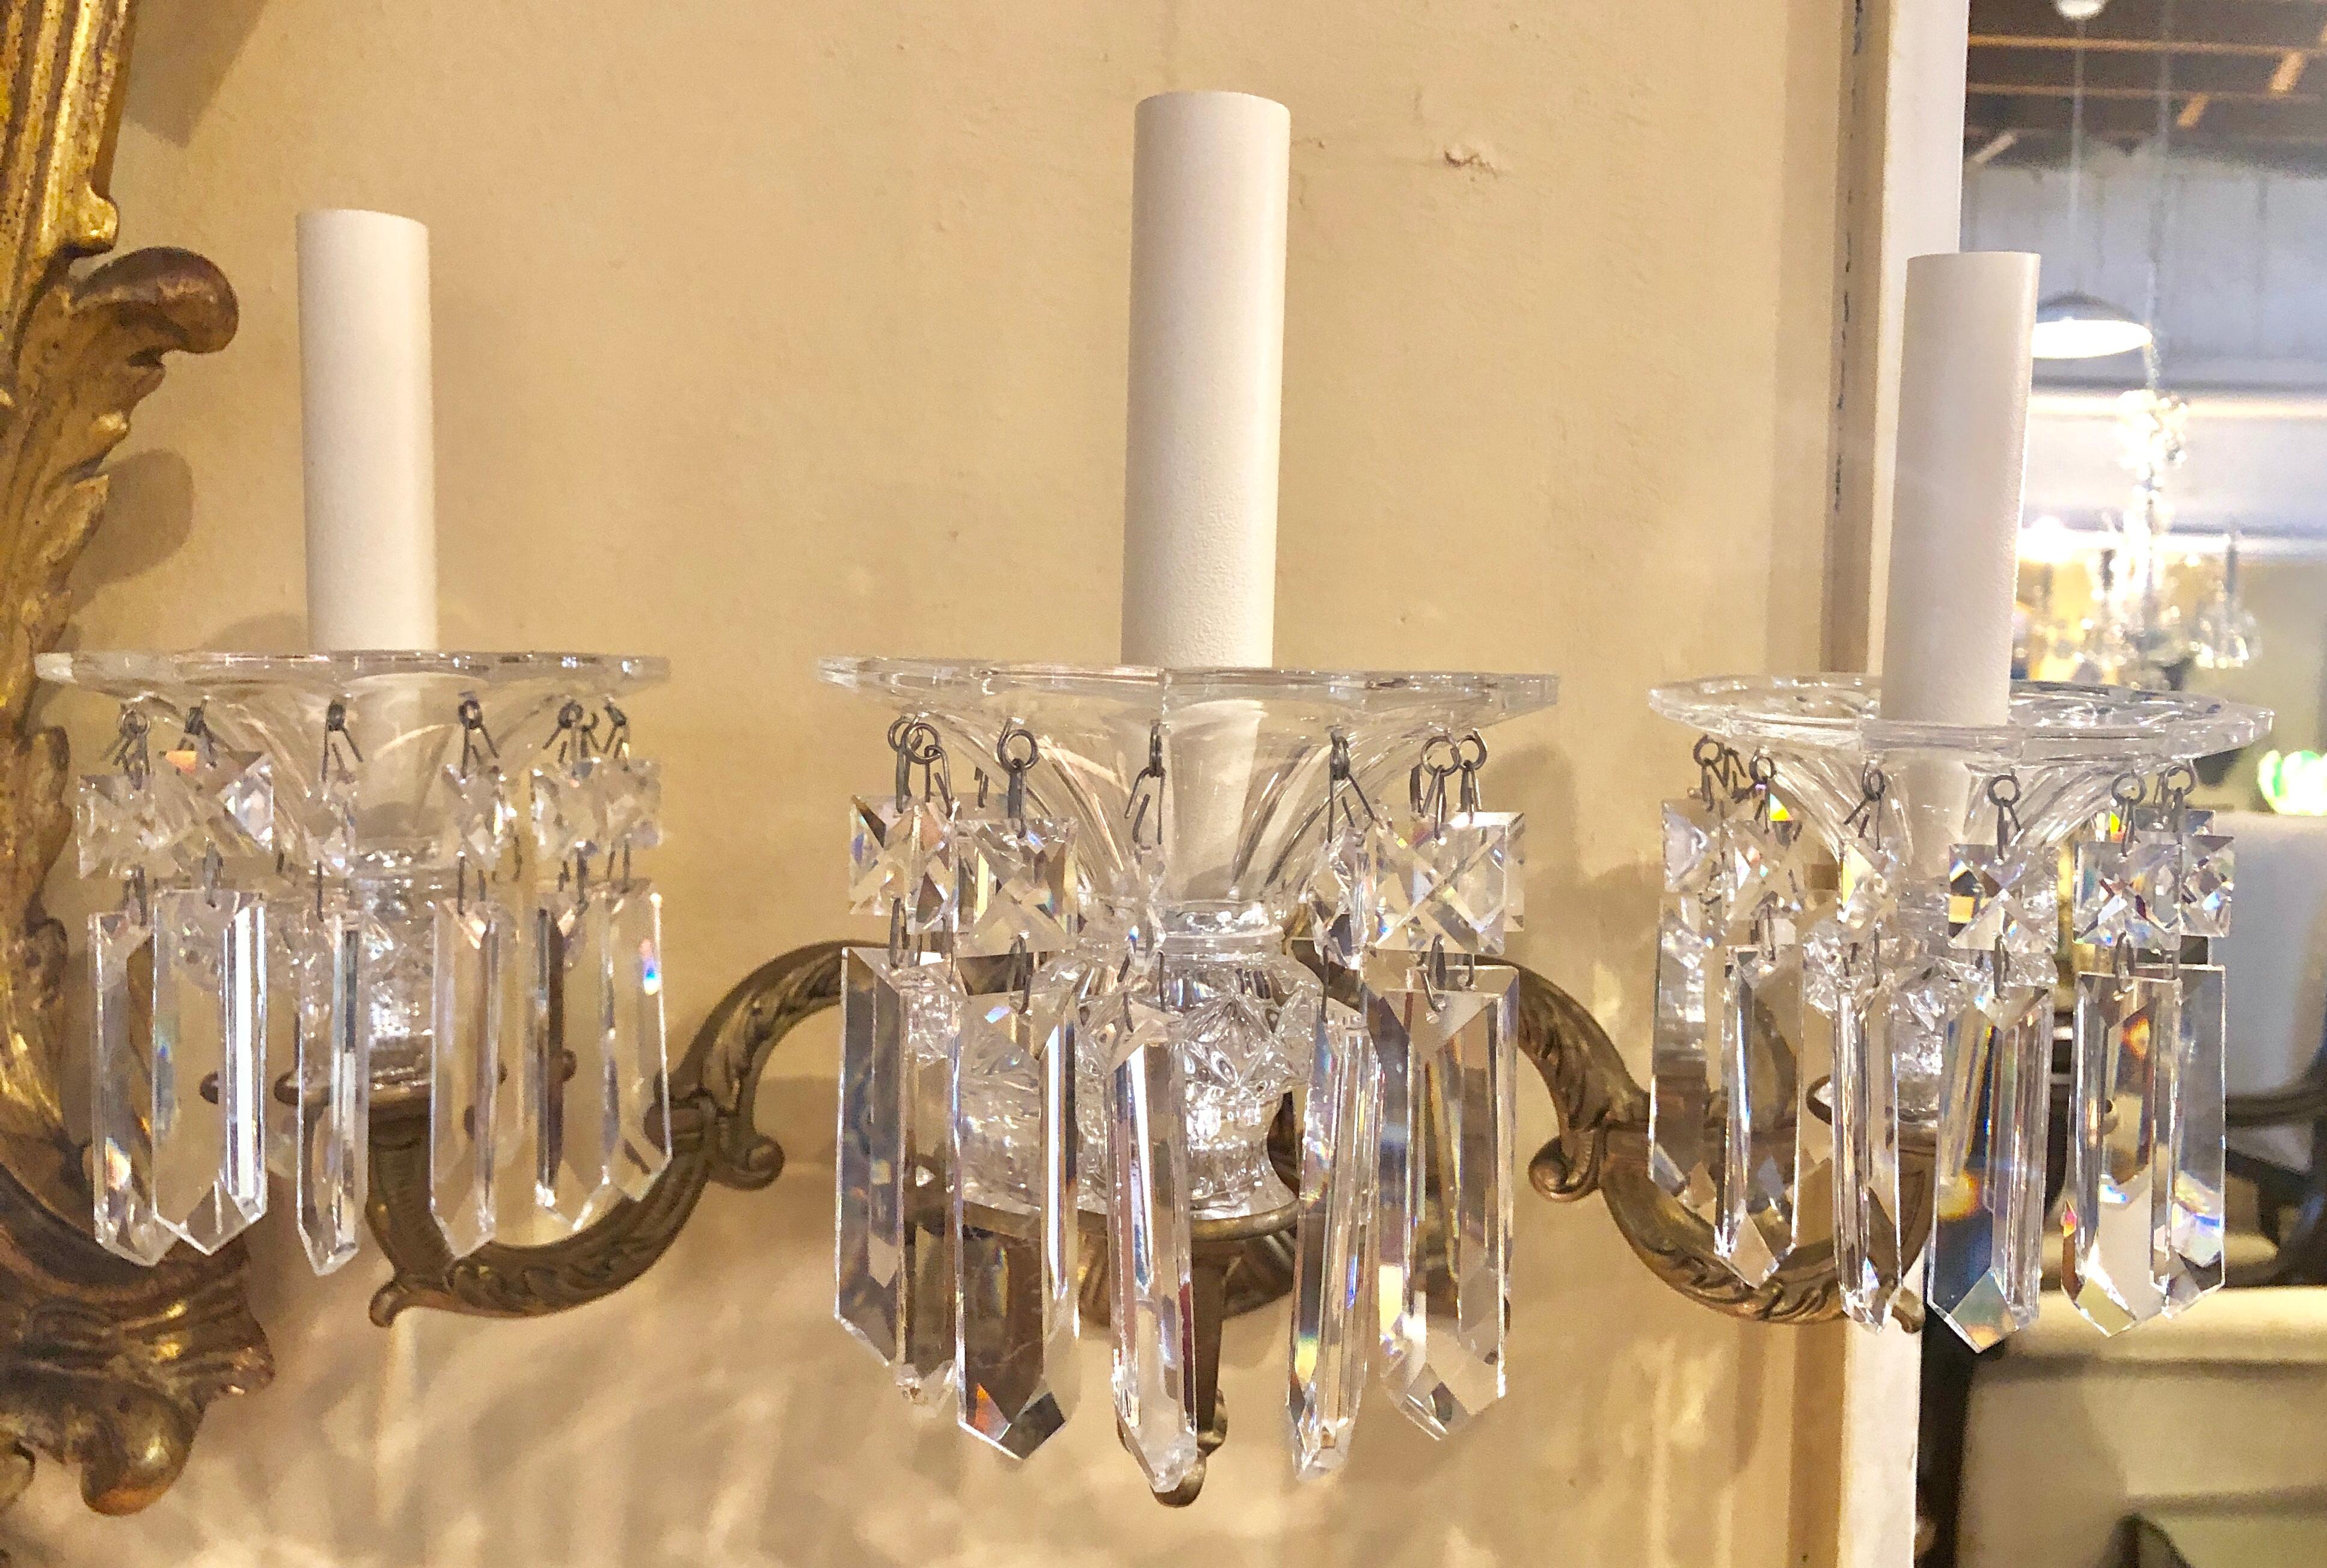 Pair of three-light solid brass sconces handcut crystals by Schonbek.